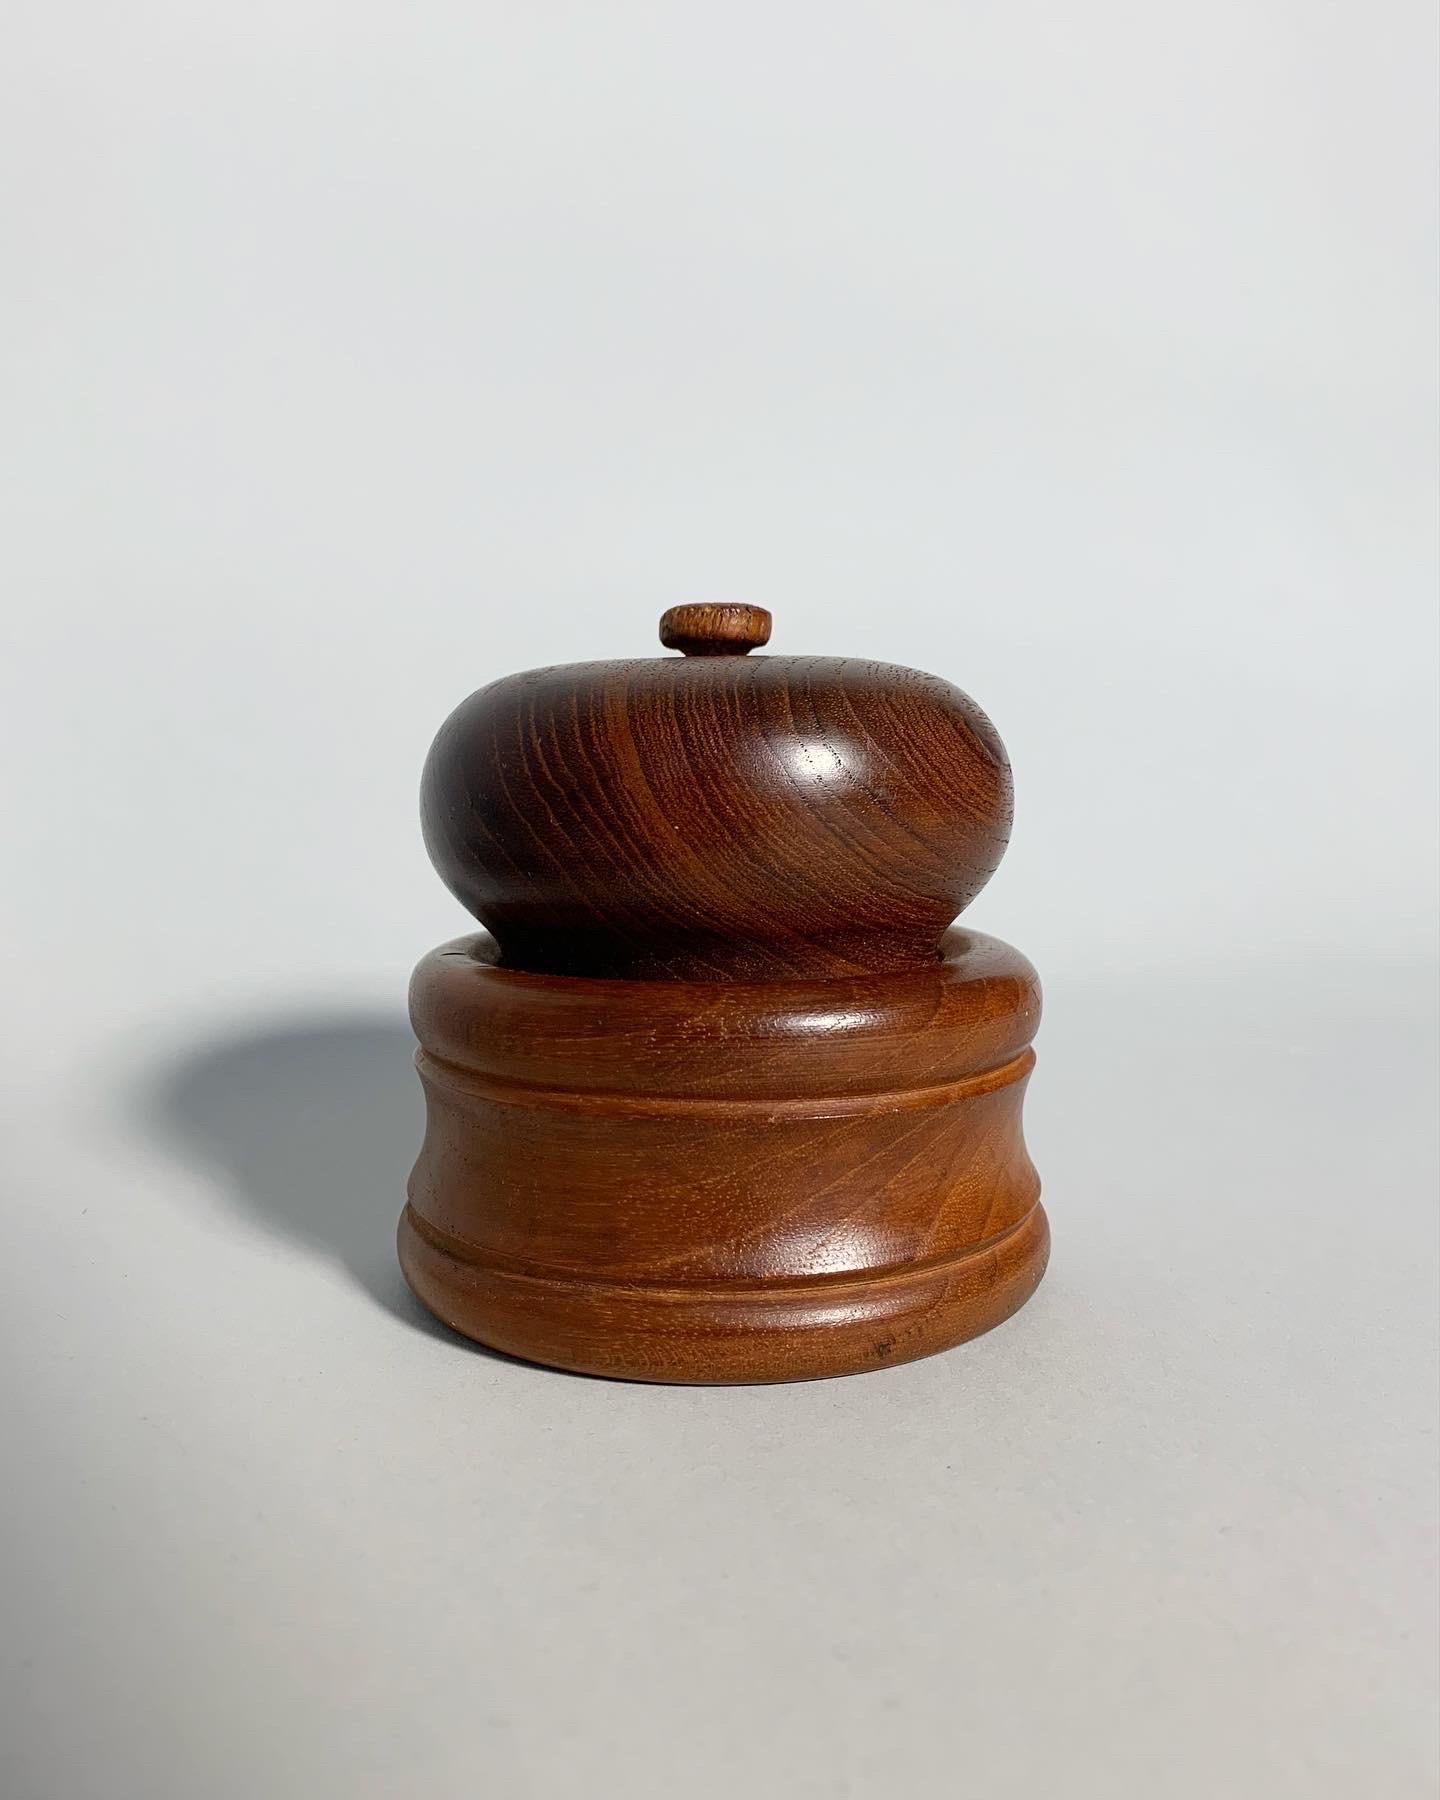 Pepper mill with integrated salt shaker by Nissen, Denmark in the 1960s.
Made of solid teak.

The salt can be filled in on top, the pepper on the bottom.
The stainless steel mill was made by Peugeot for Nissen.

Height: 9.5 cm
Diameter: 9.5